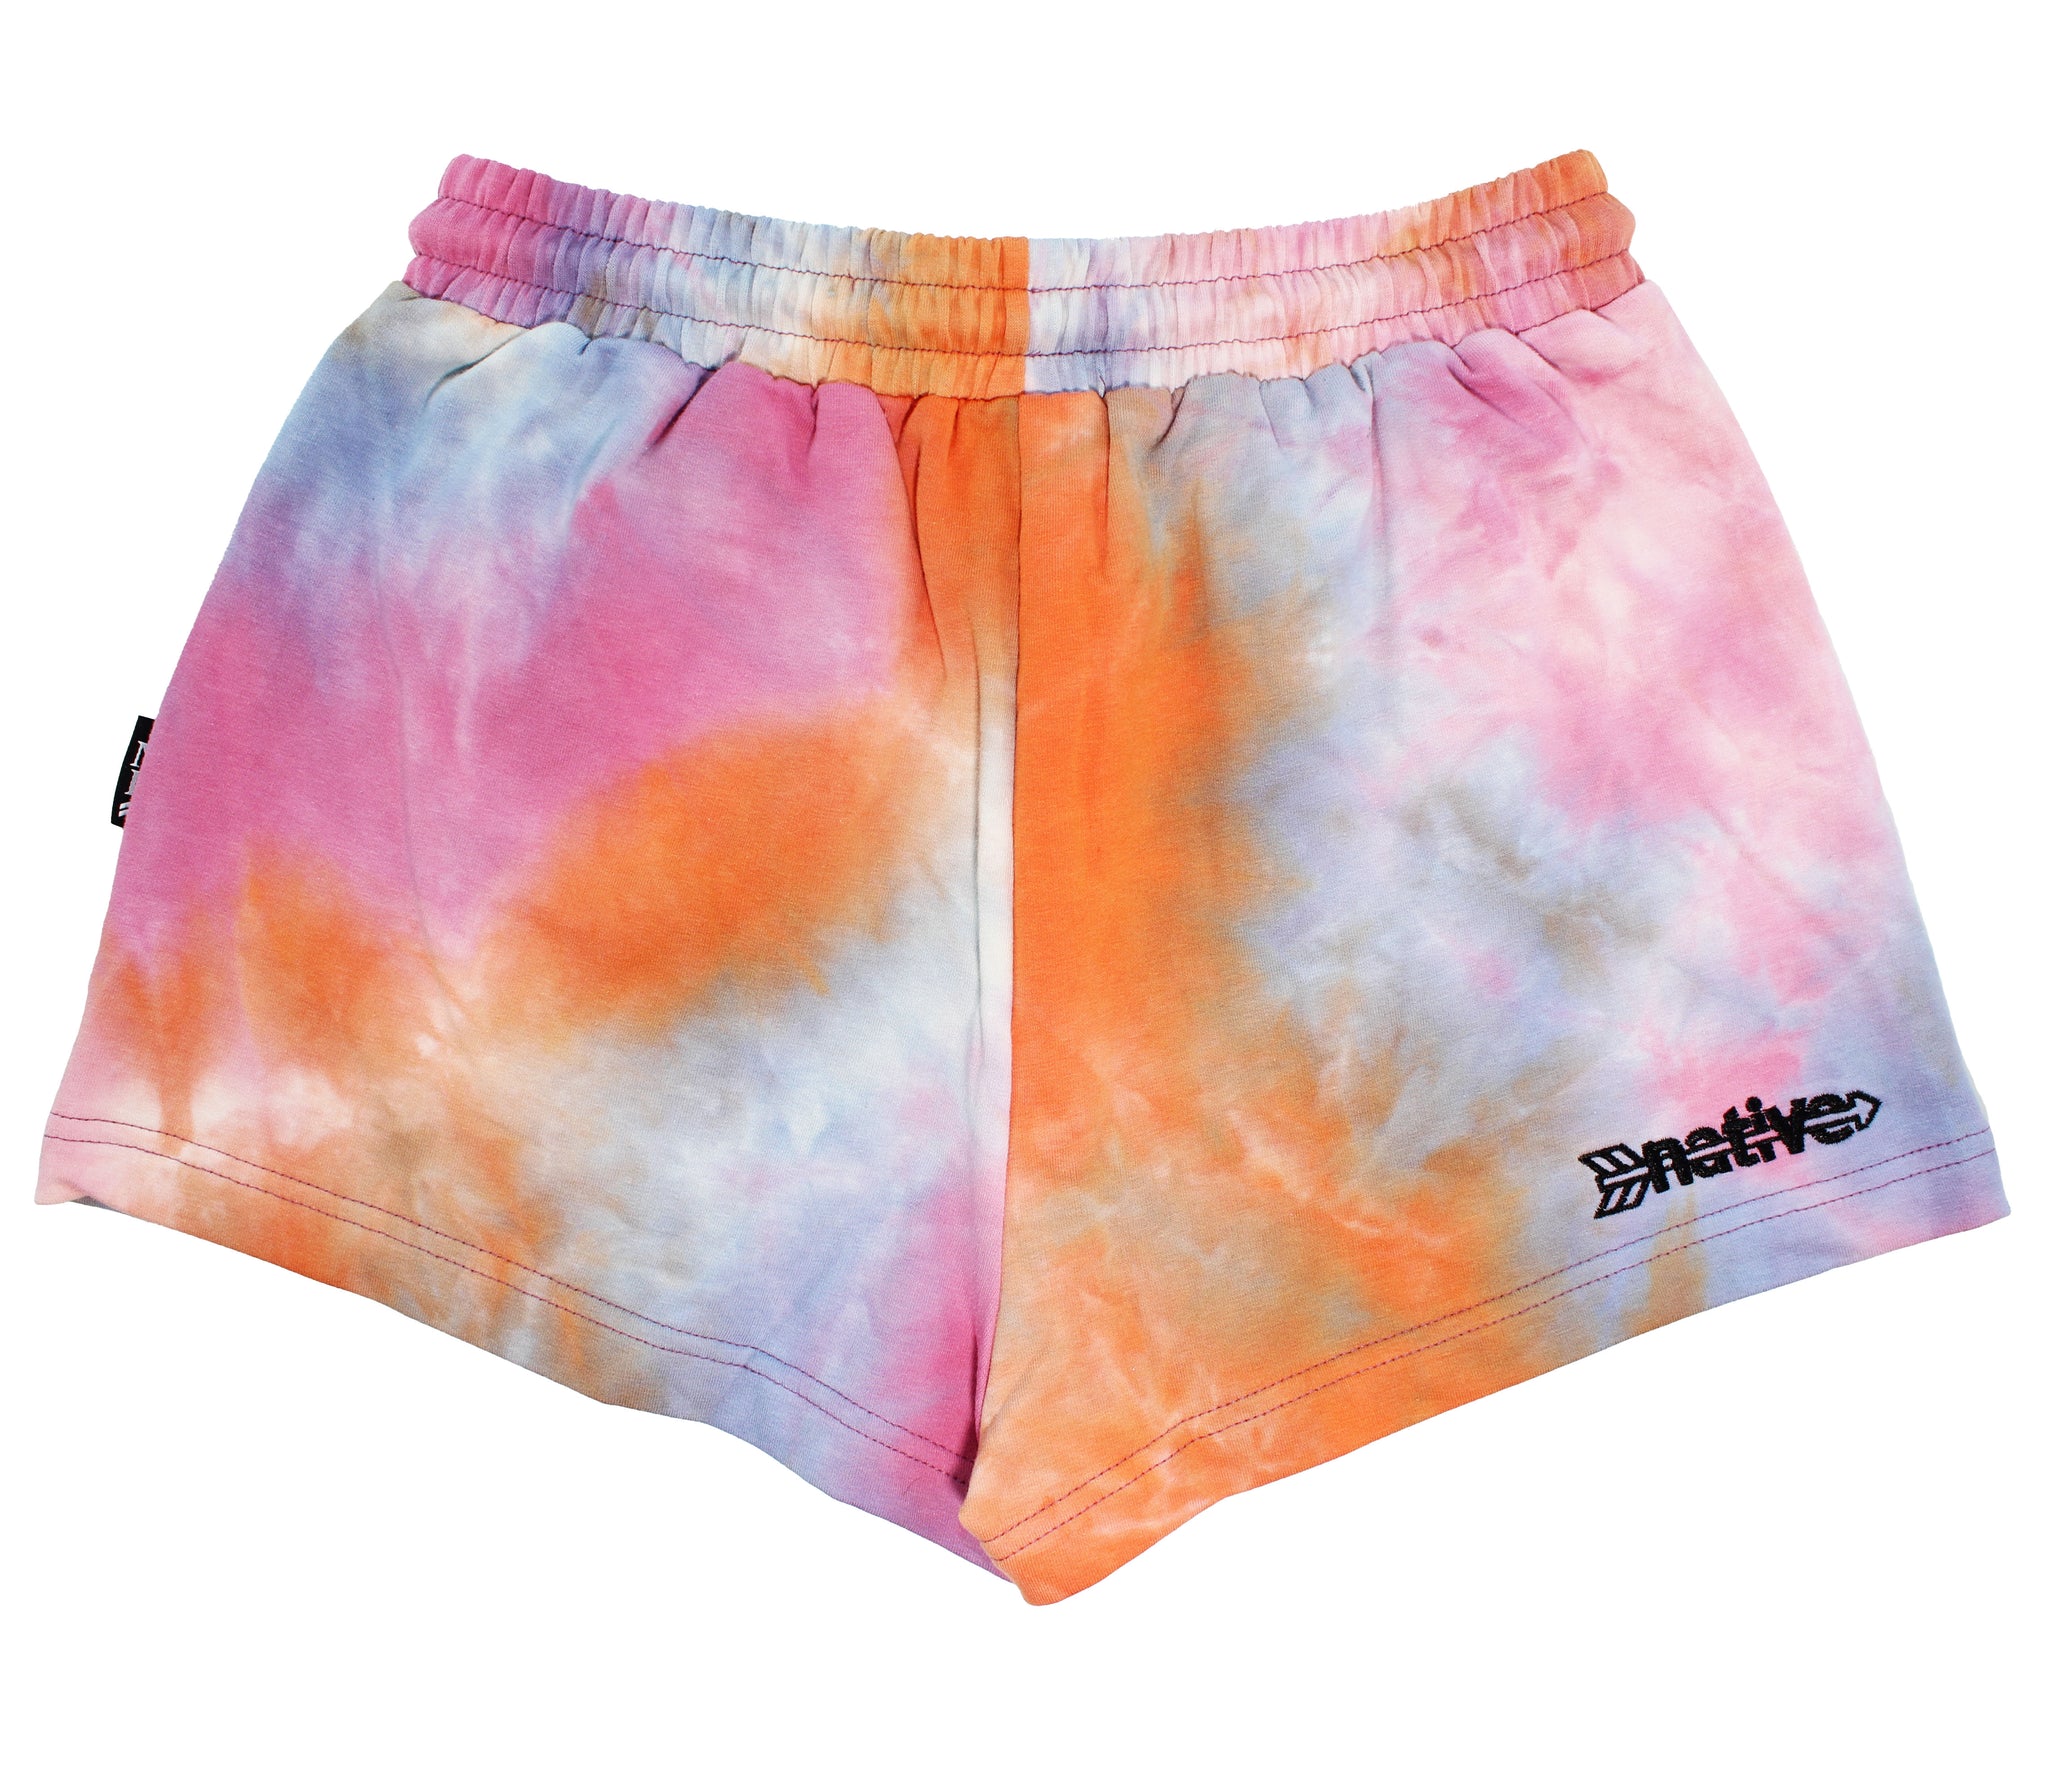 tie dye french terry sweat shorties in sunset